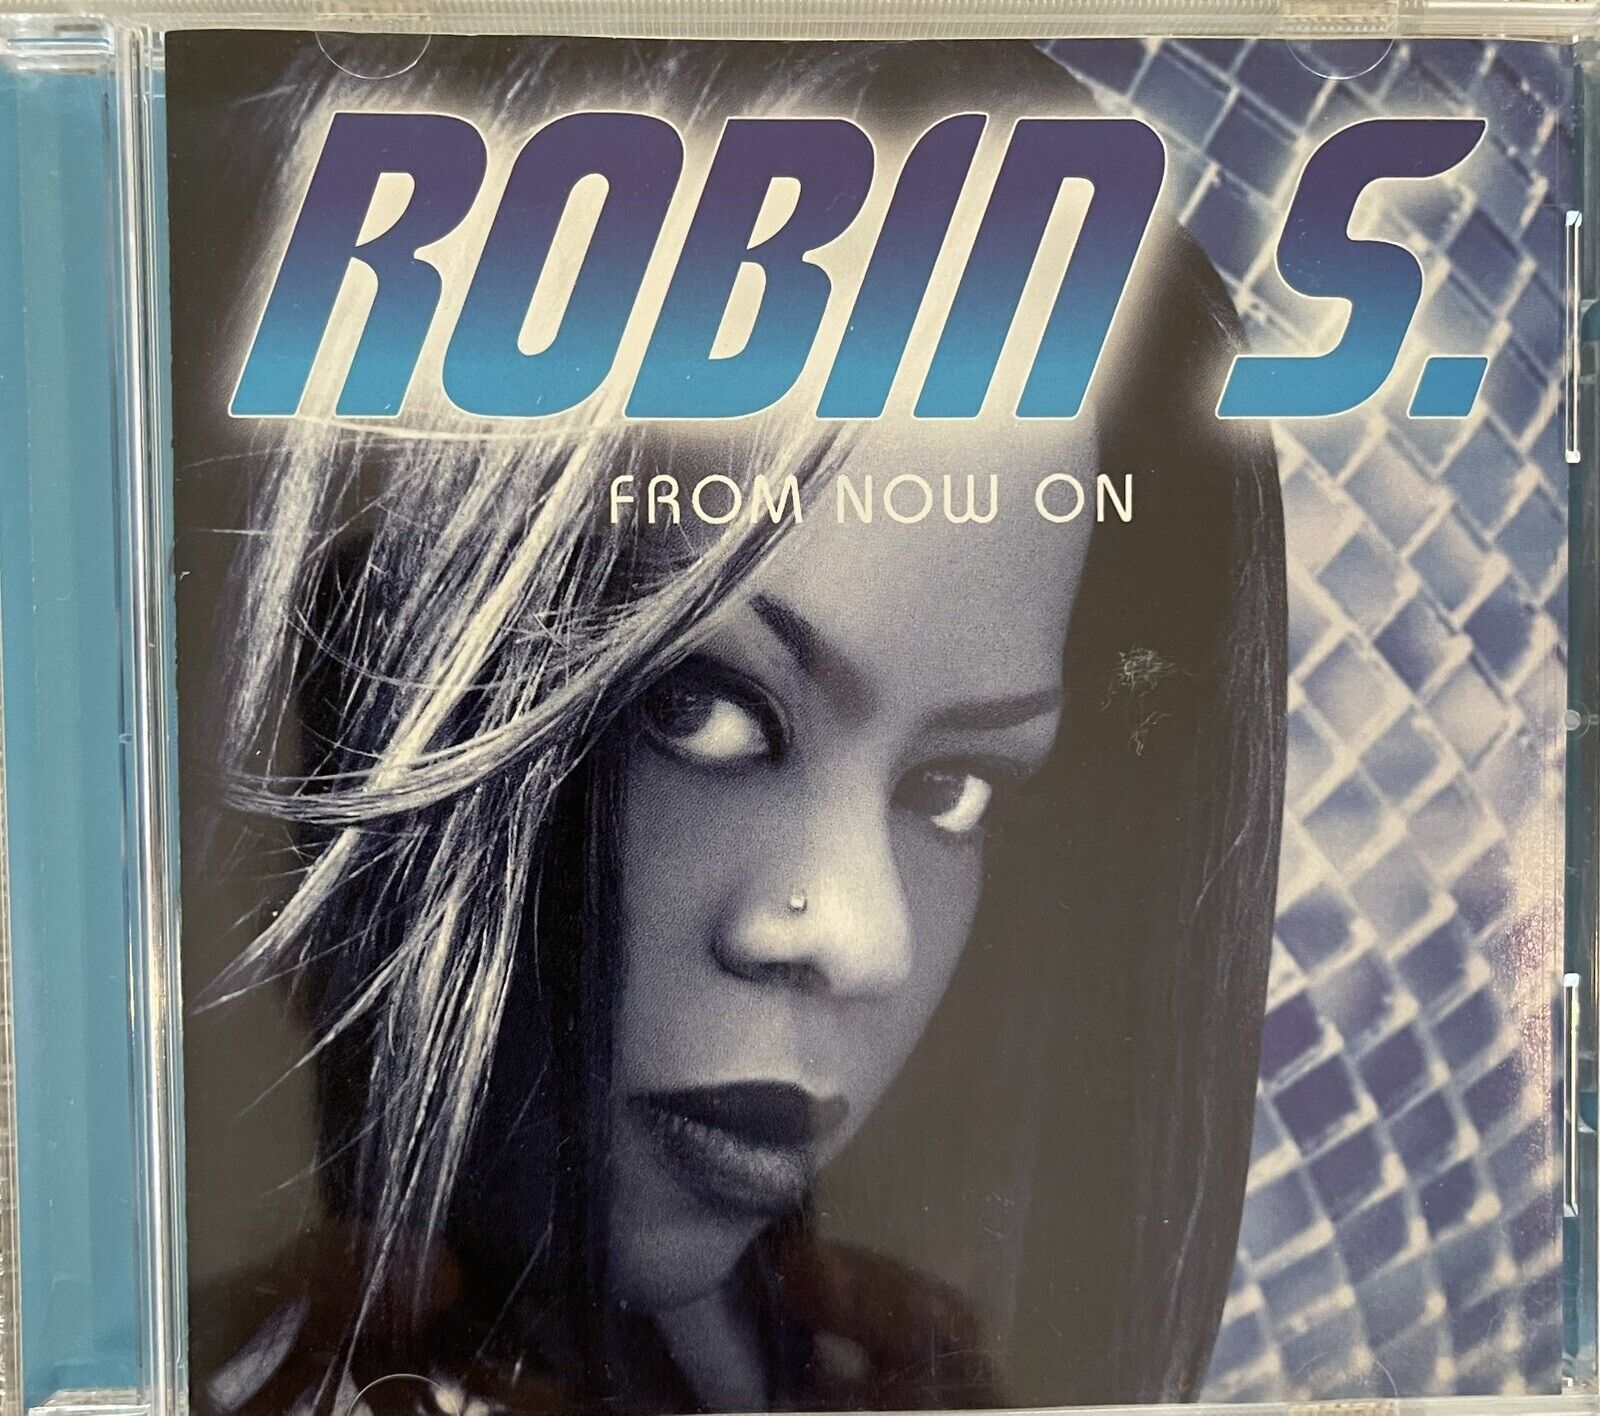  Robin S. : From Now On (CD, 1997, Big Beat / Atlantic Records) R&B/Disco Style